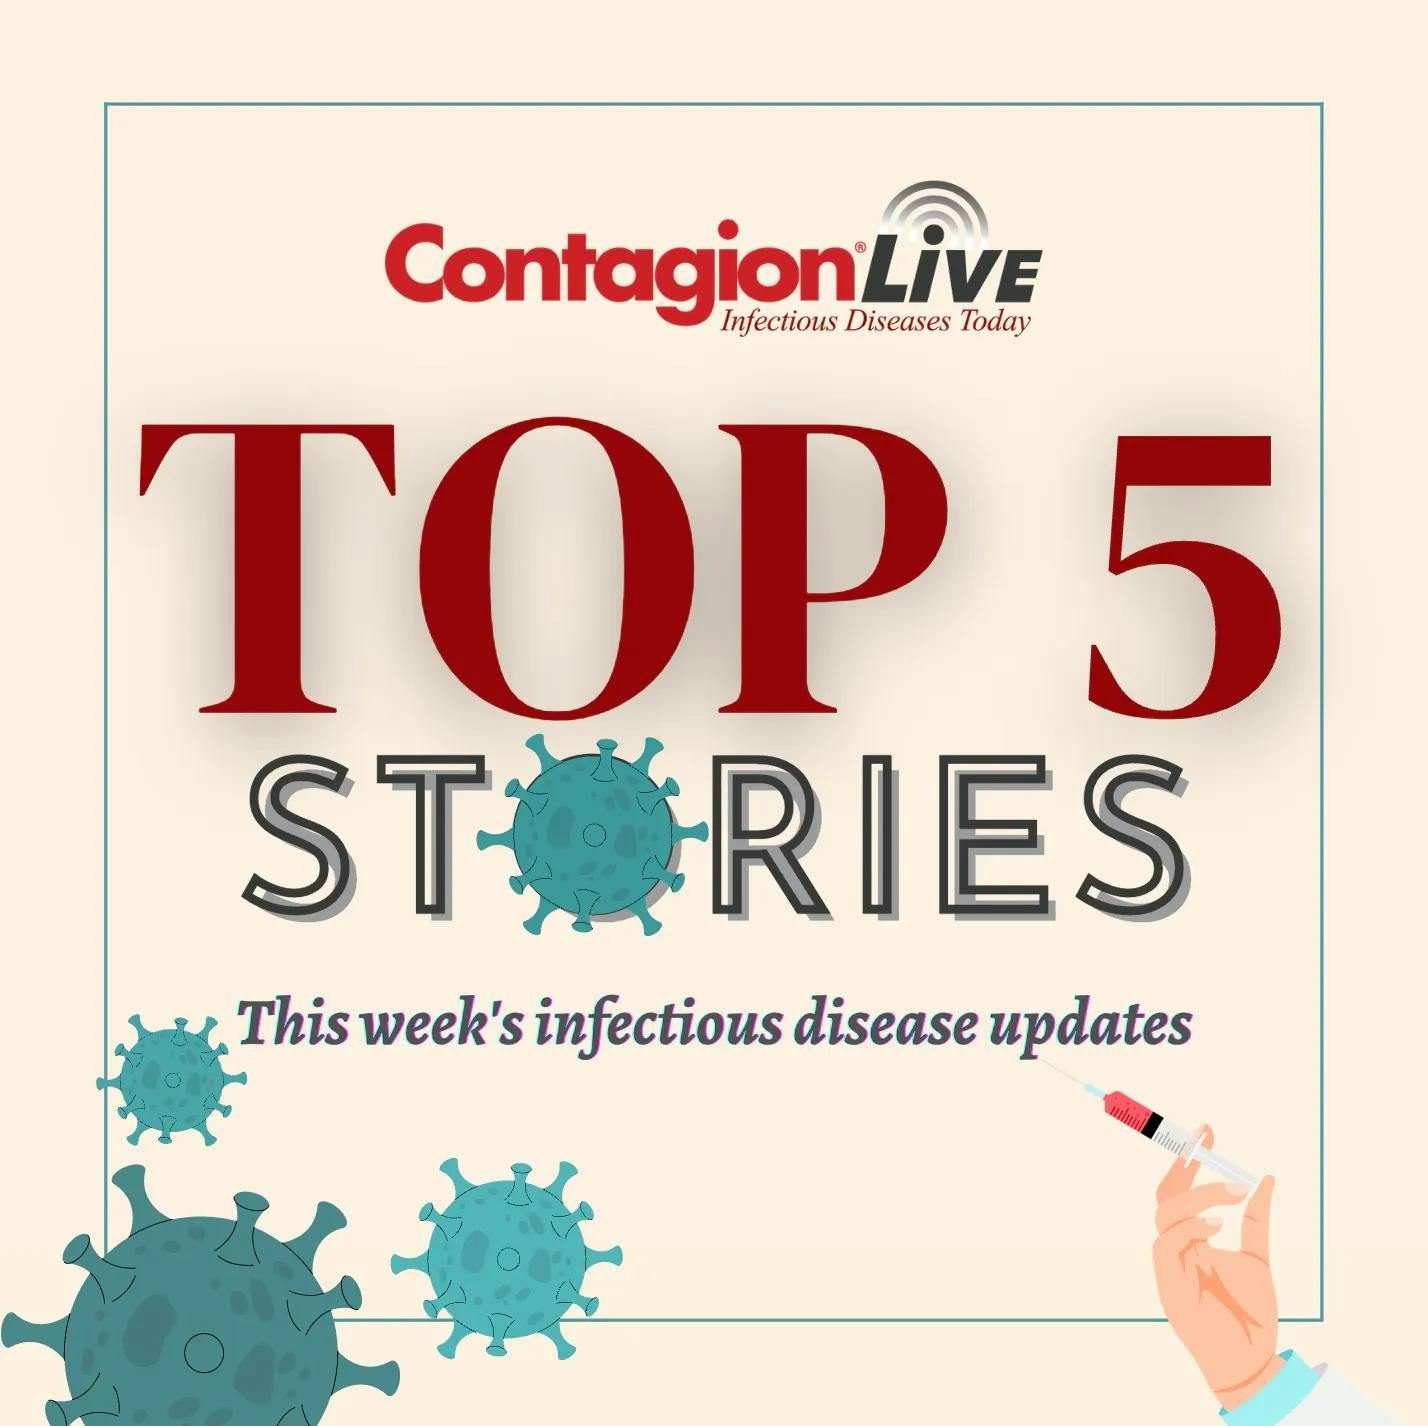 Top Infectious Disease Stories: Week of January 22